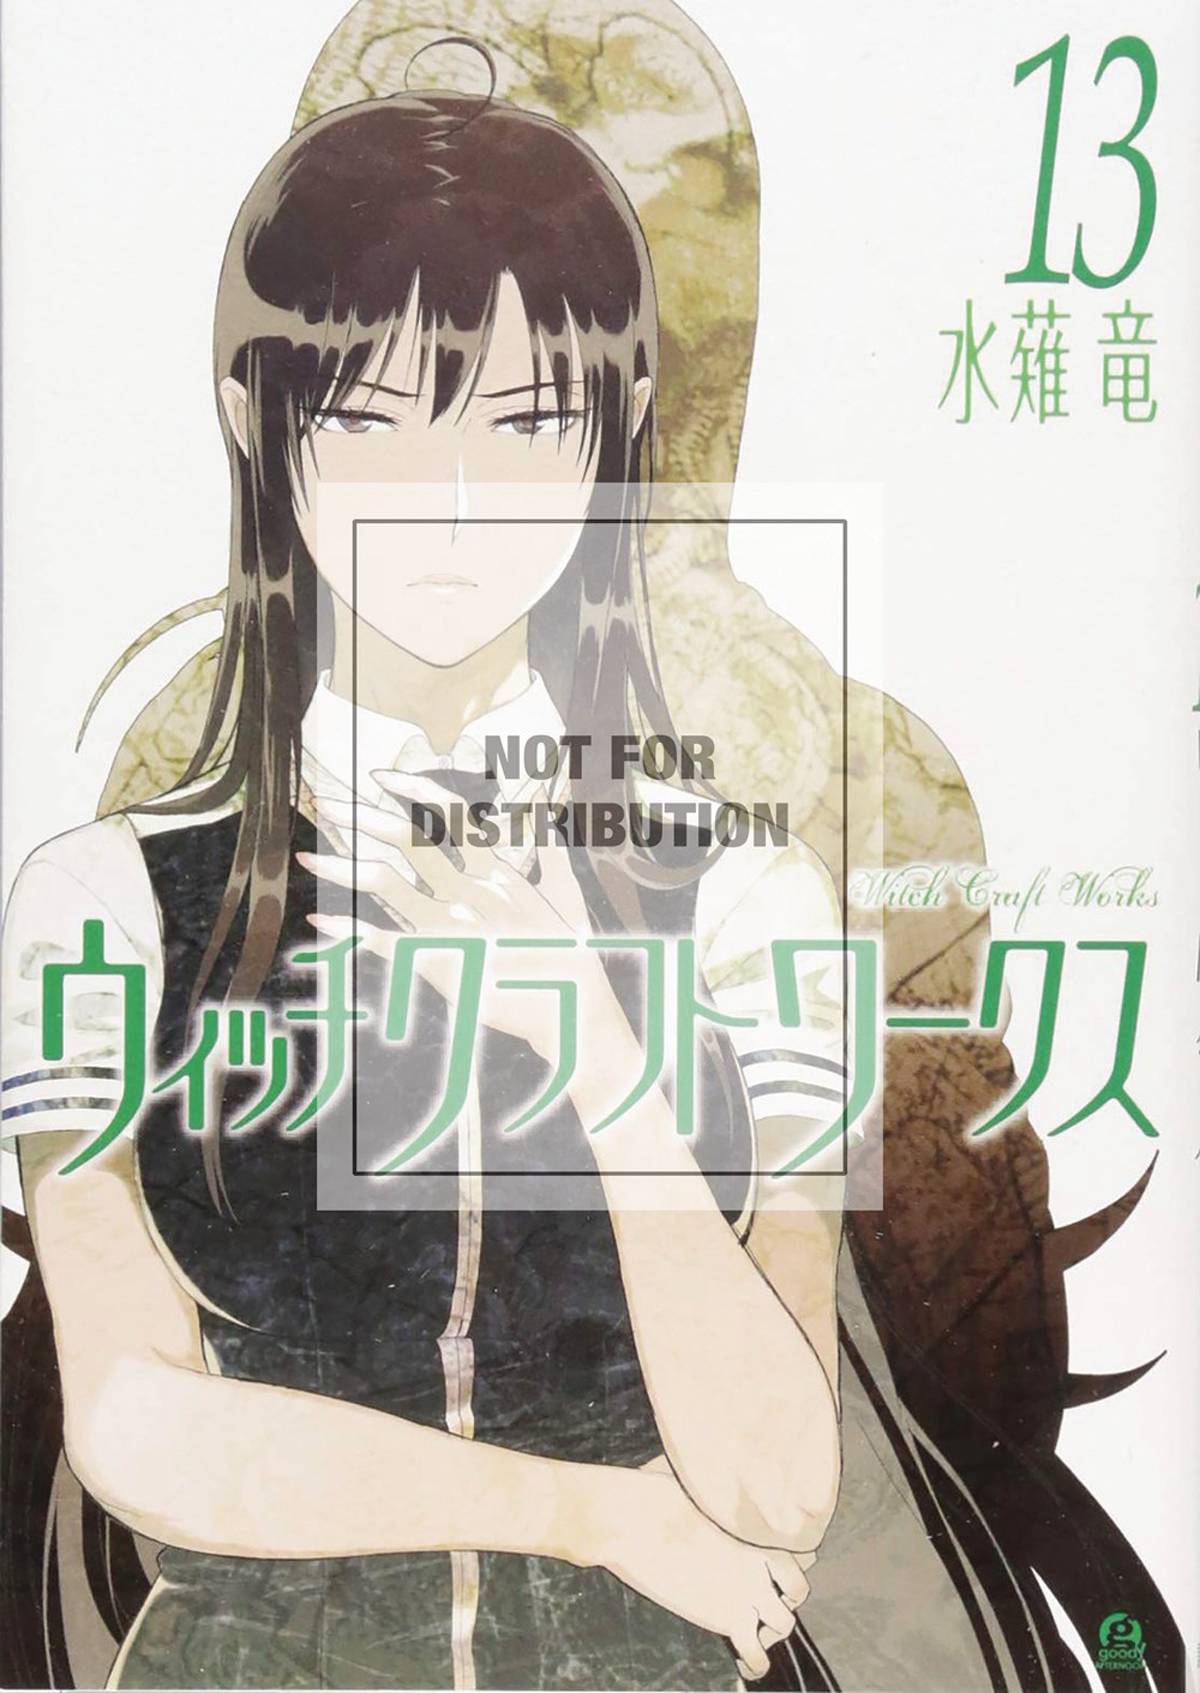 Sep Witchcraft Works Gn Vol 13 Previews World